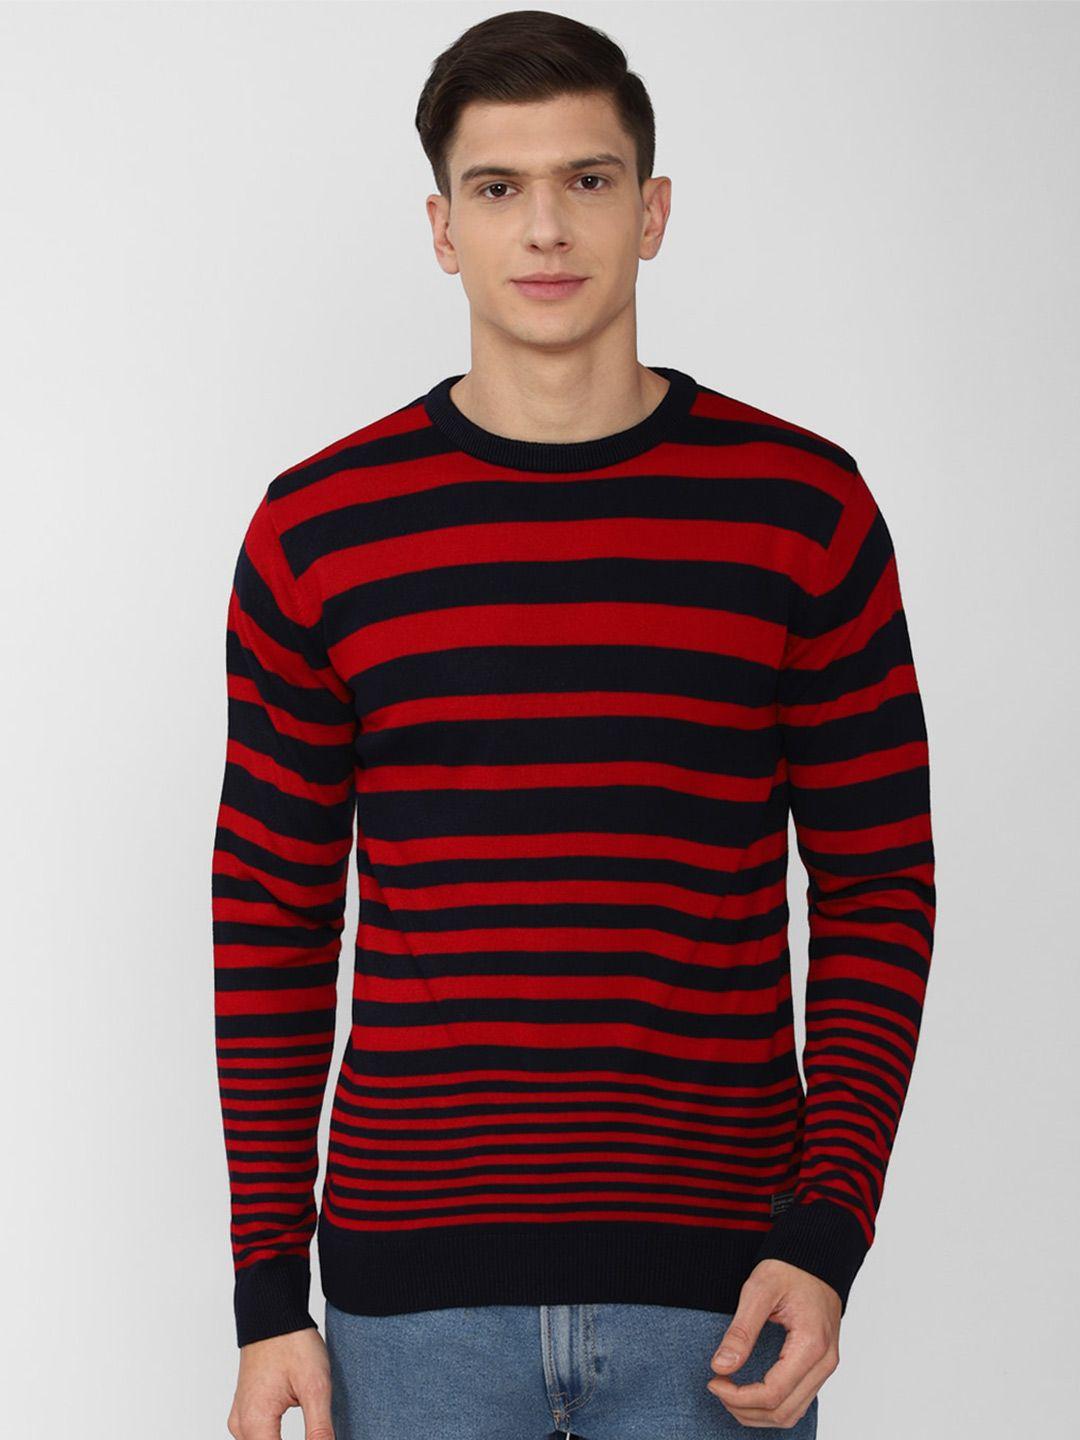 peter england casuals men red & black striped pullover sweater